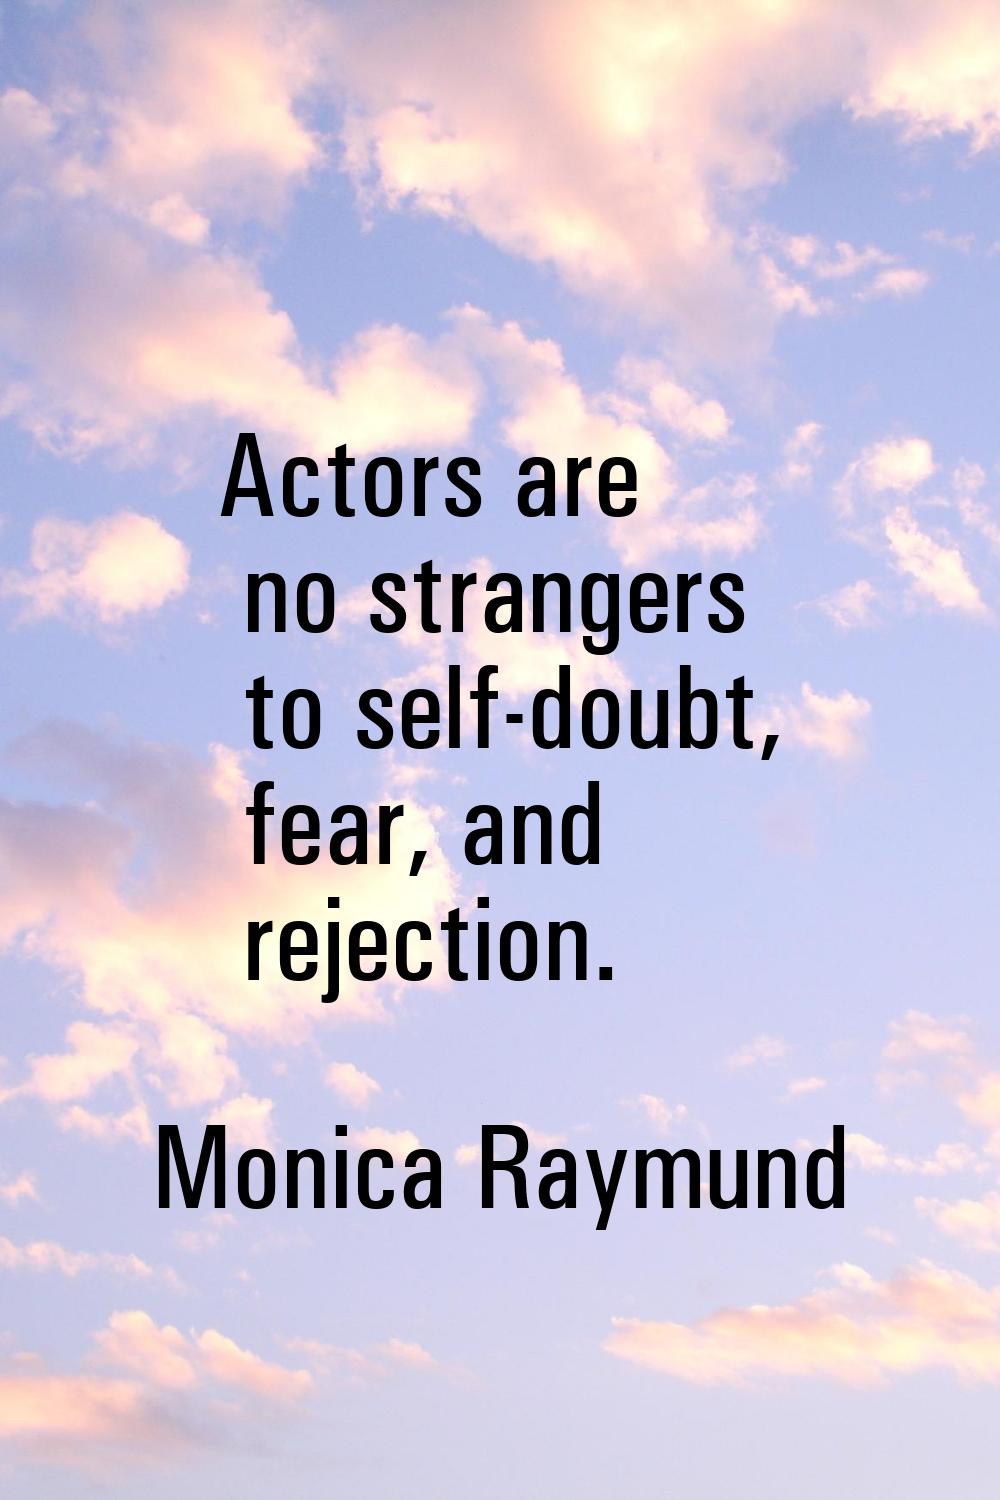 Actors are no strangers to self-doubt, fear, and rejection.